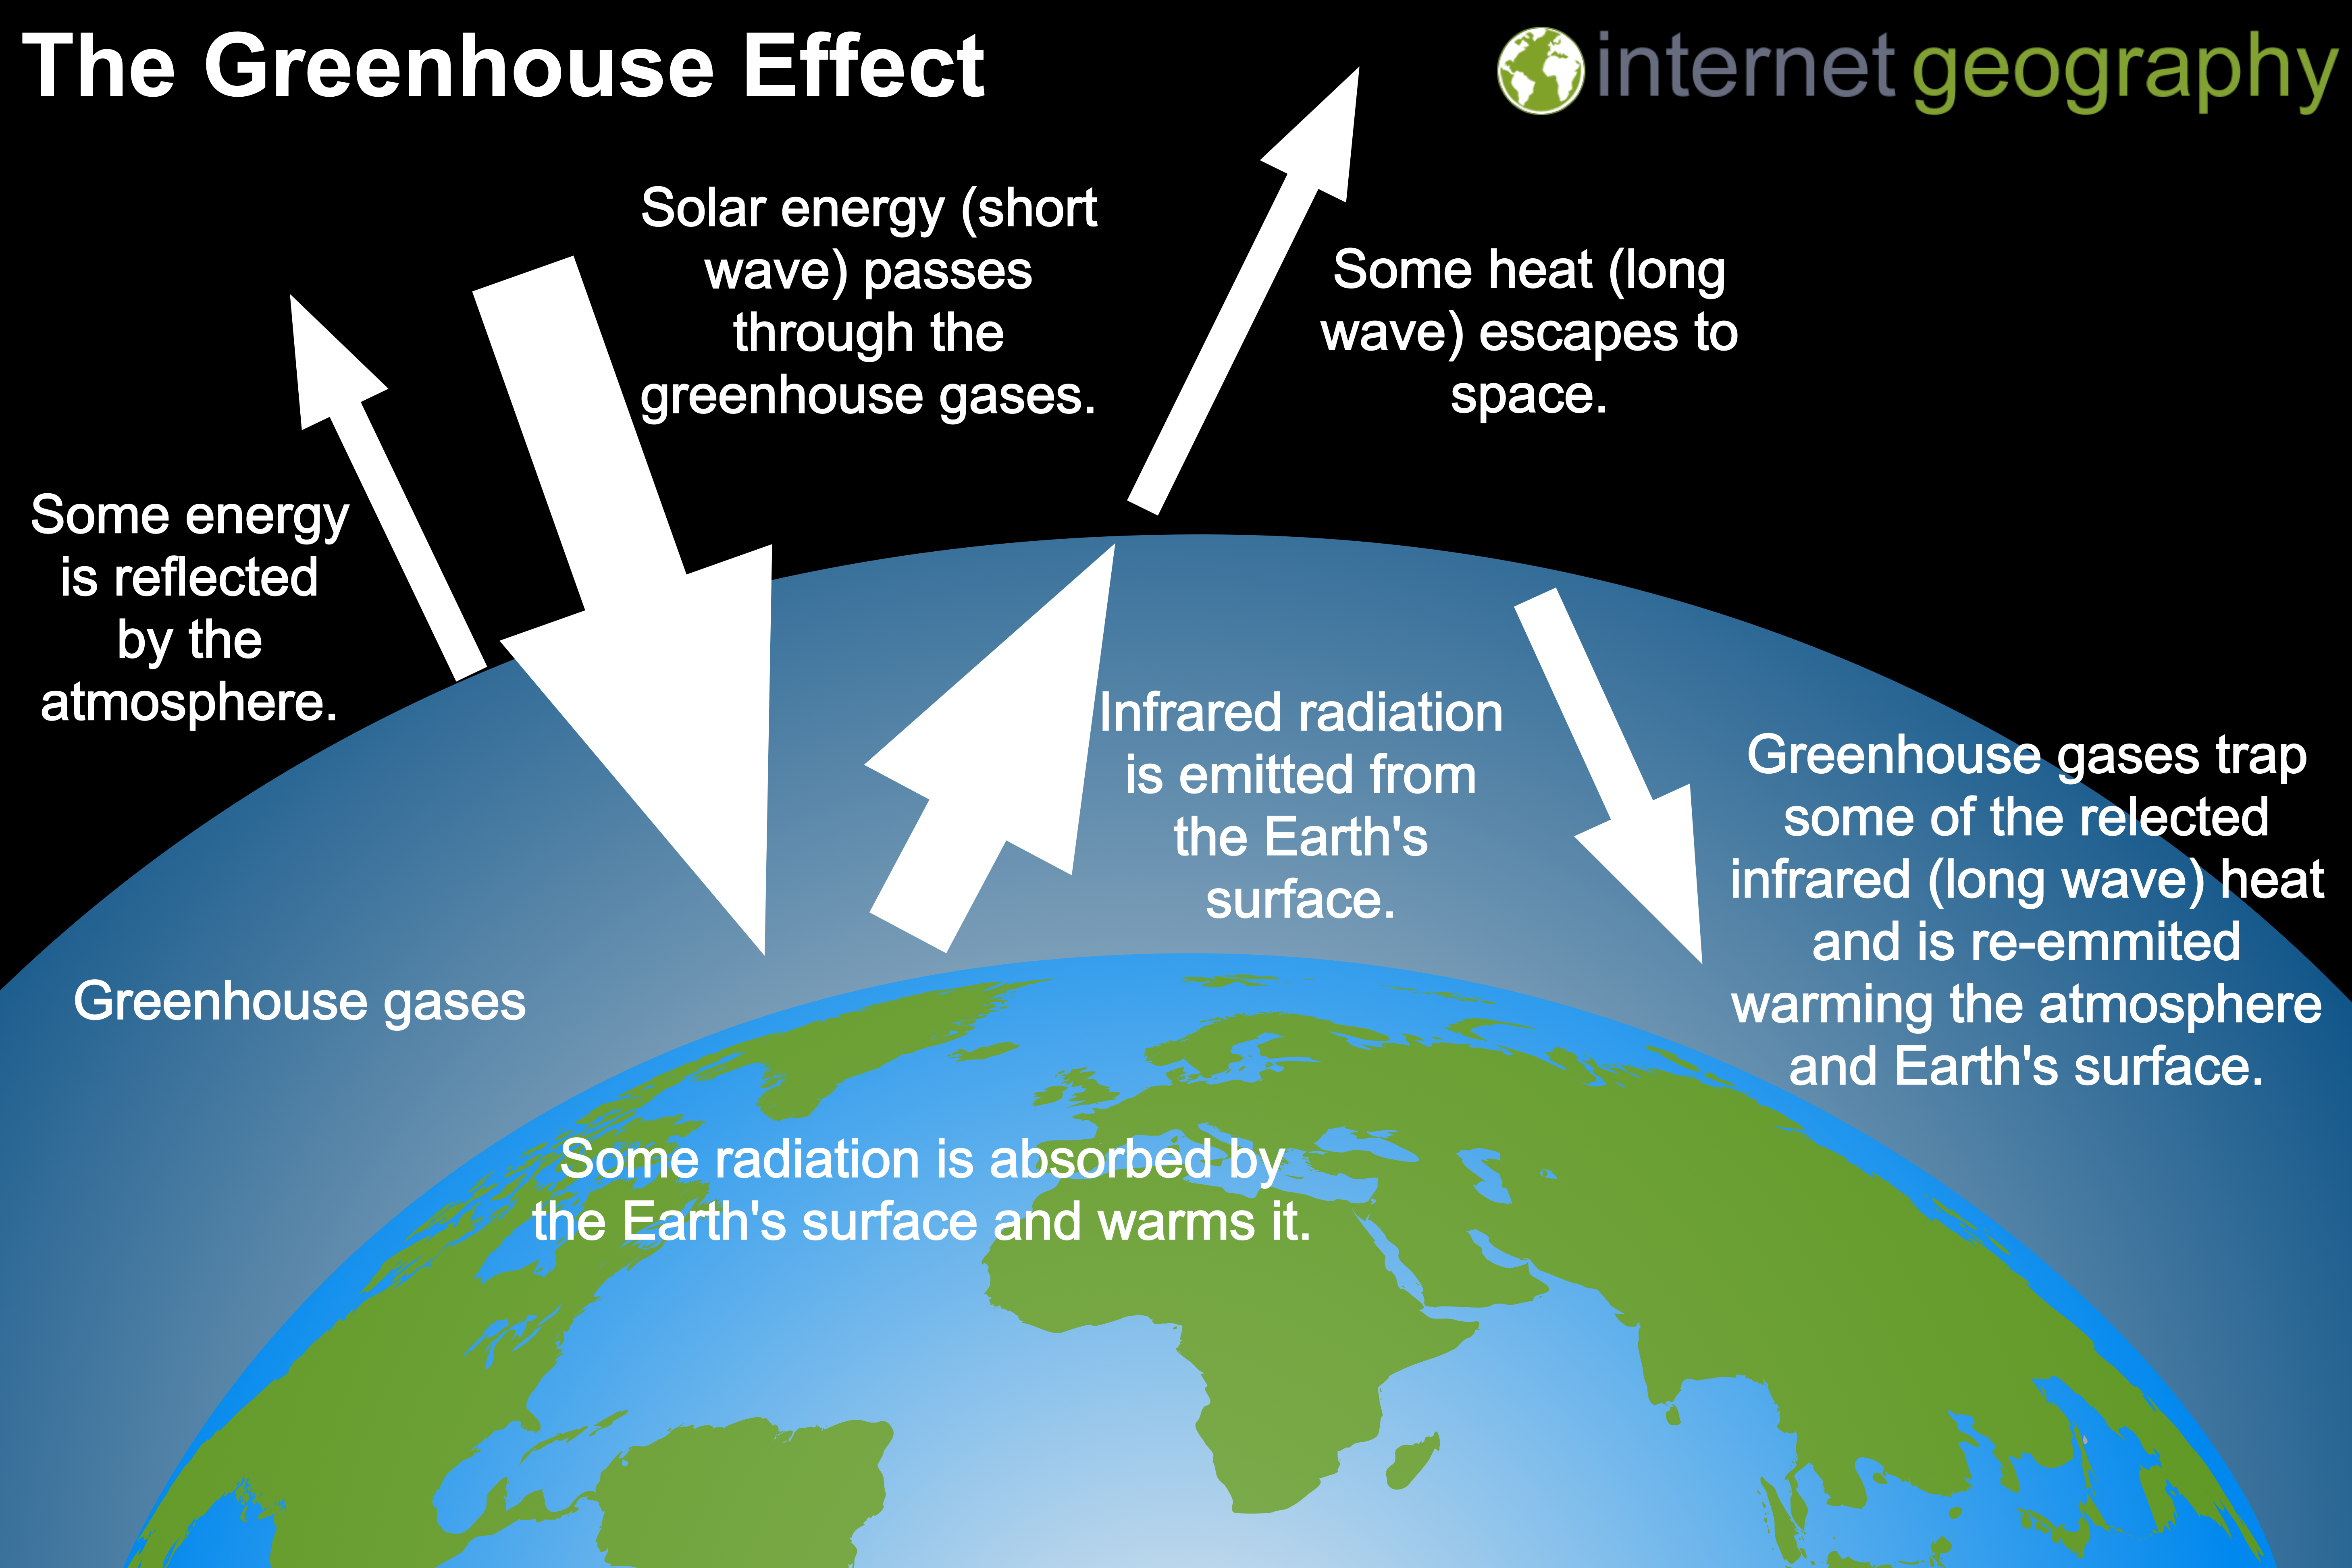 image how the Earth traps and reflects solar energy 